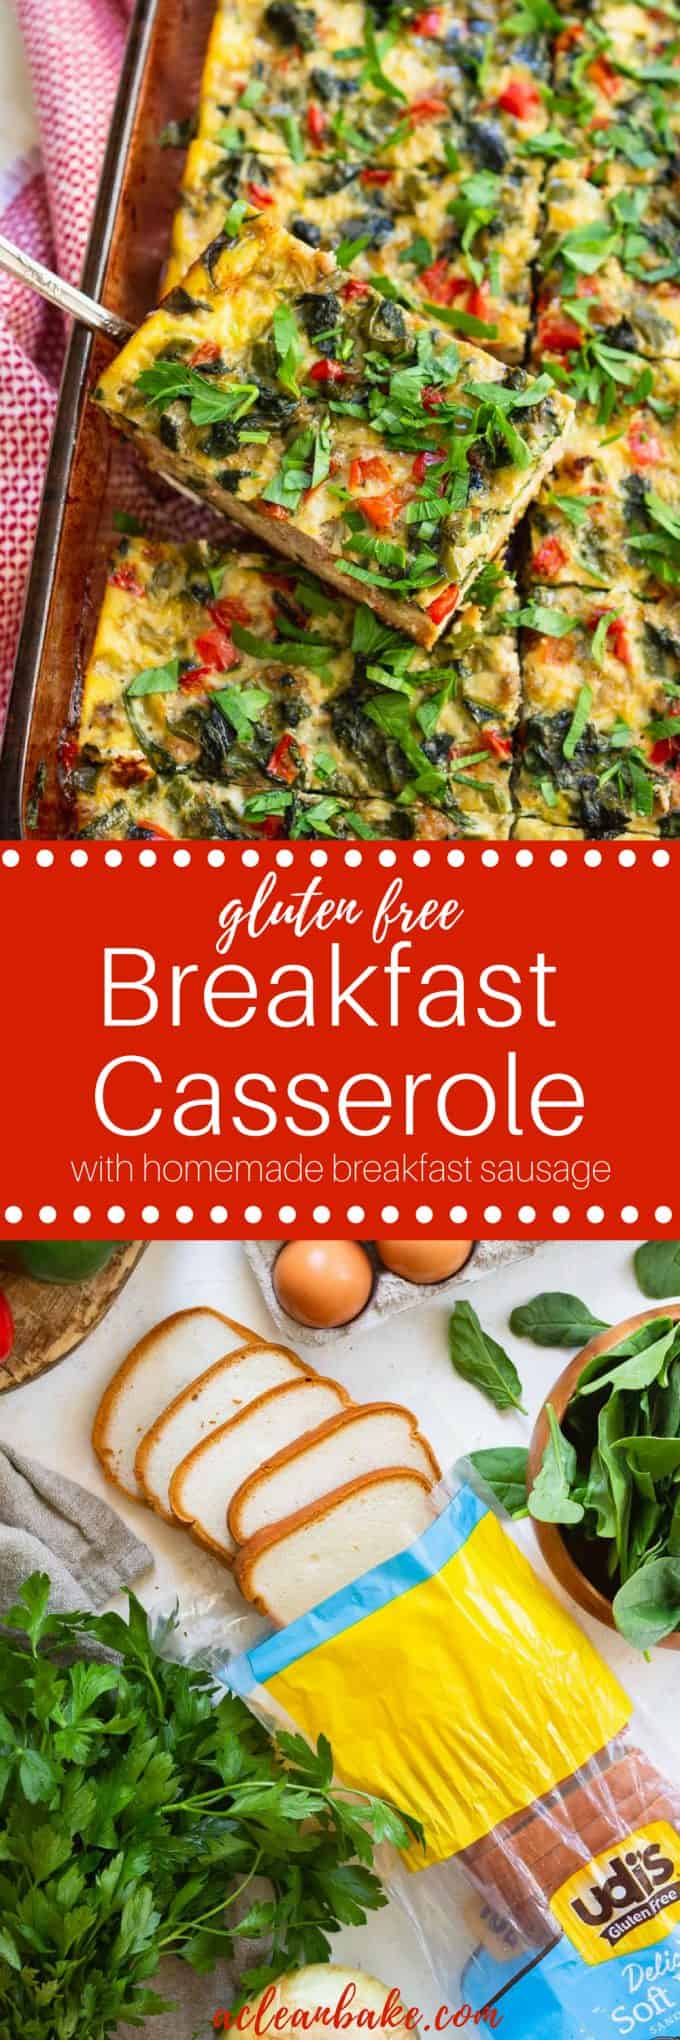 This gluten free breakfast casserole is perfect for meal prep, hungry kids, holiday guests and everything in between! A base of @udisglutenfree sandwich bread topped with all real food ingredients make this a hearty and delicious meal. Pin this recipe for later - you'll be glad you did! #glutenfree #realfood #glutenfreebreakfast #healthybreakfast #glutenfreerecipes #udisglutenfree #healthyrecipes #cleaneating